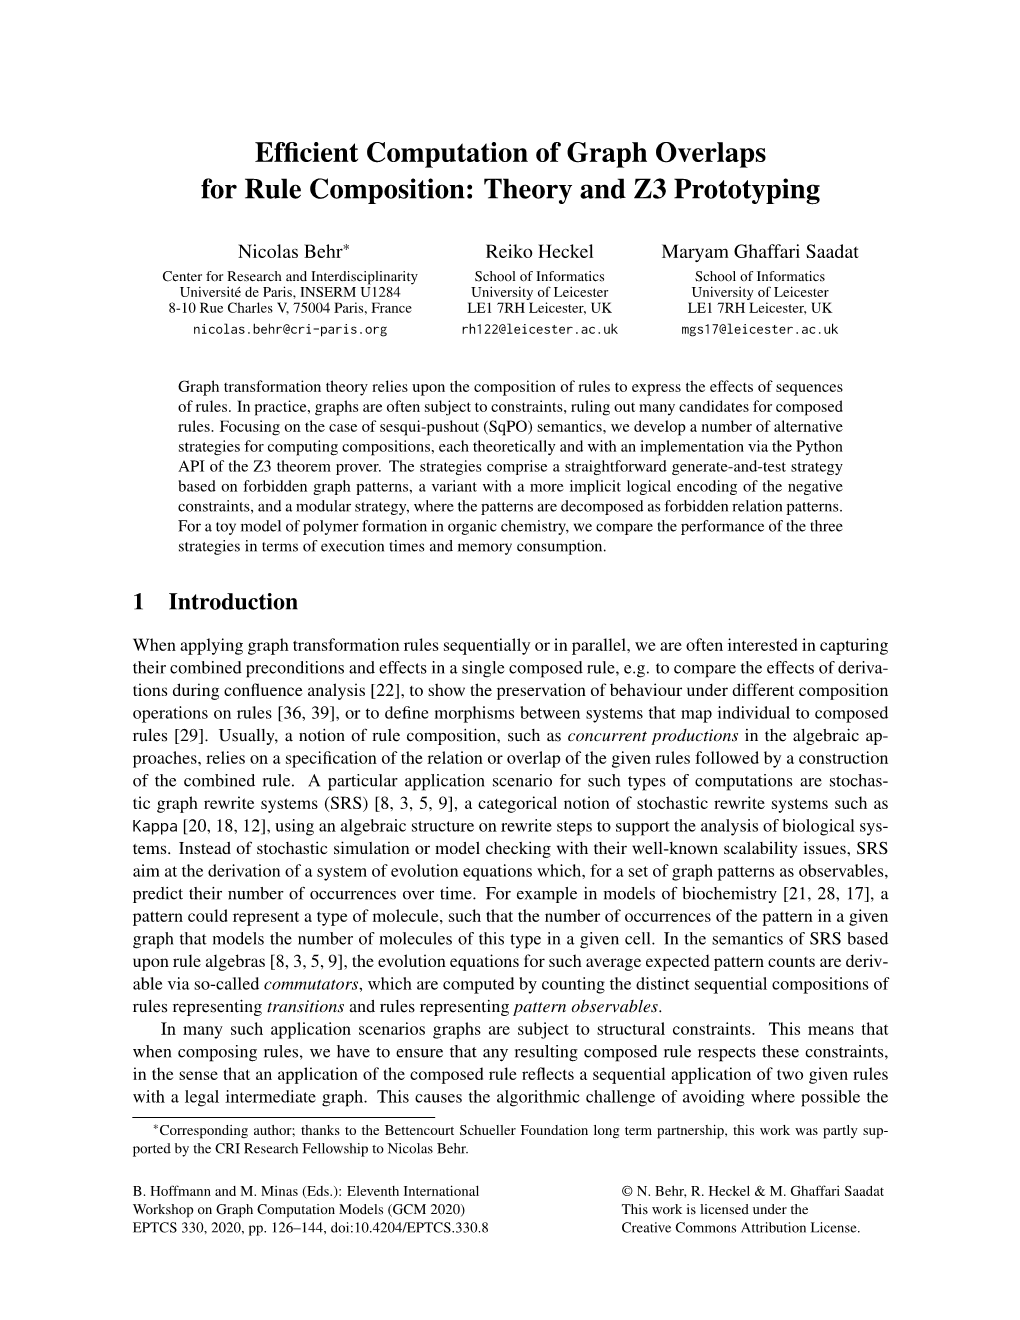 Efficient Computation of Graph Overlaps for Rule Composition: Theory and Z3 Prototyping